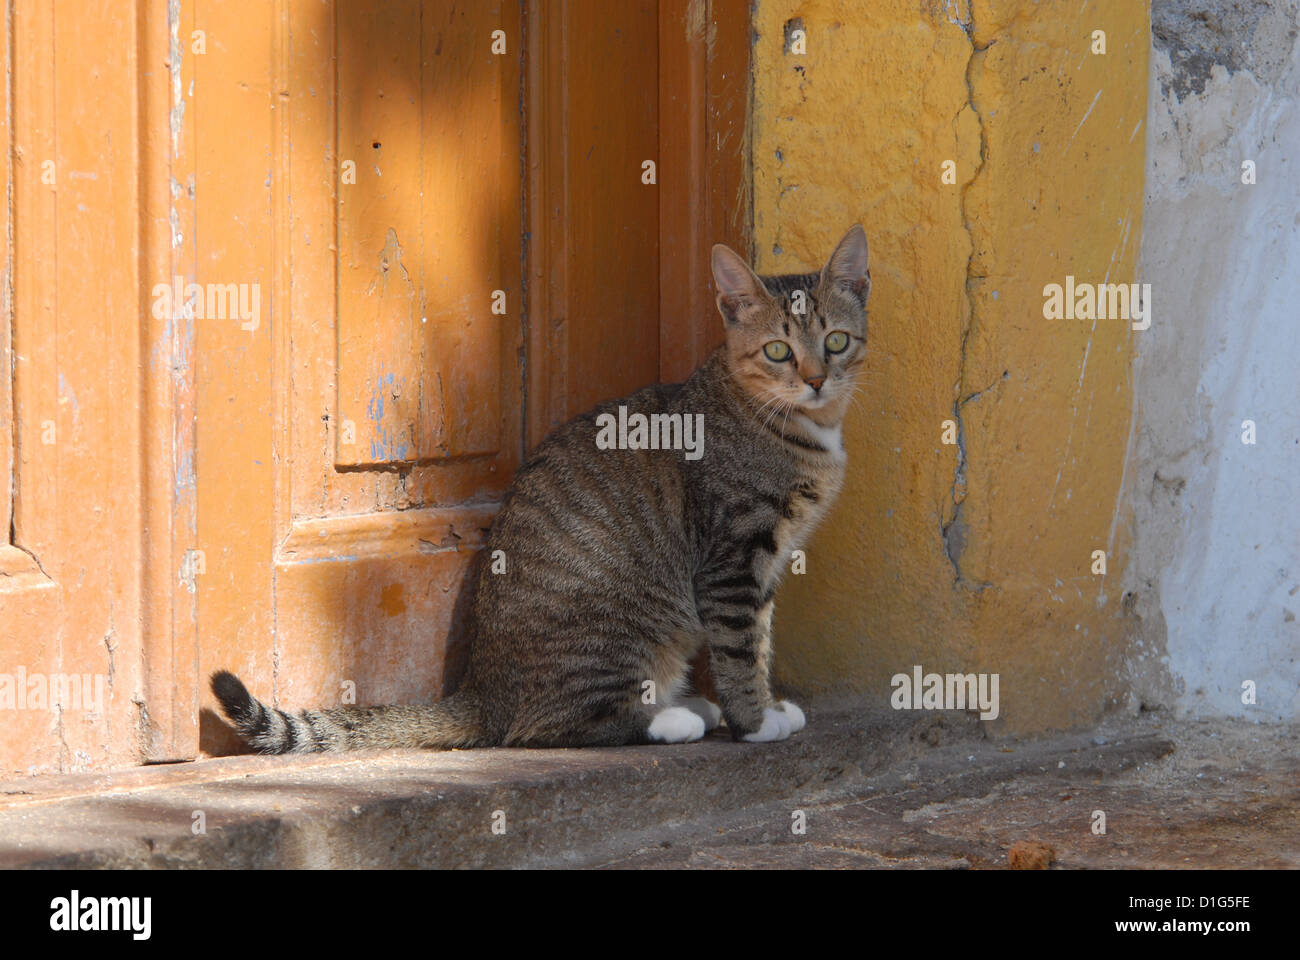 Cat sitting on a threshold in front of an old door, Greece, Dodecanese Island, Non-pedigree Shorthair, felis silvestris forma Stock Photo